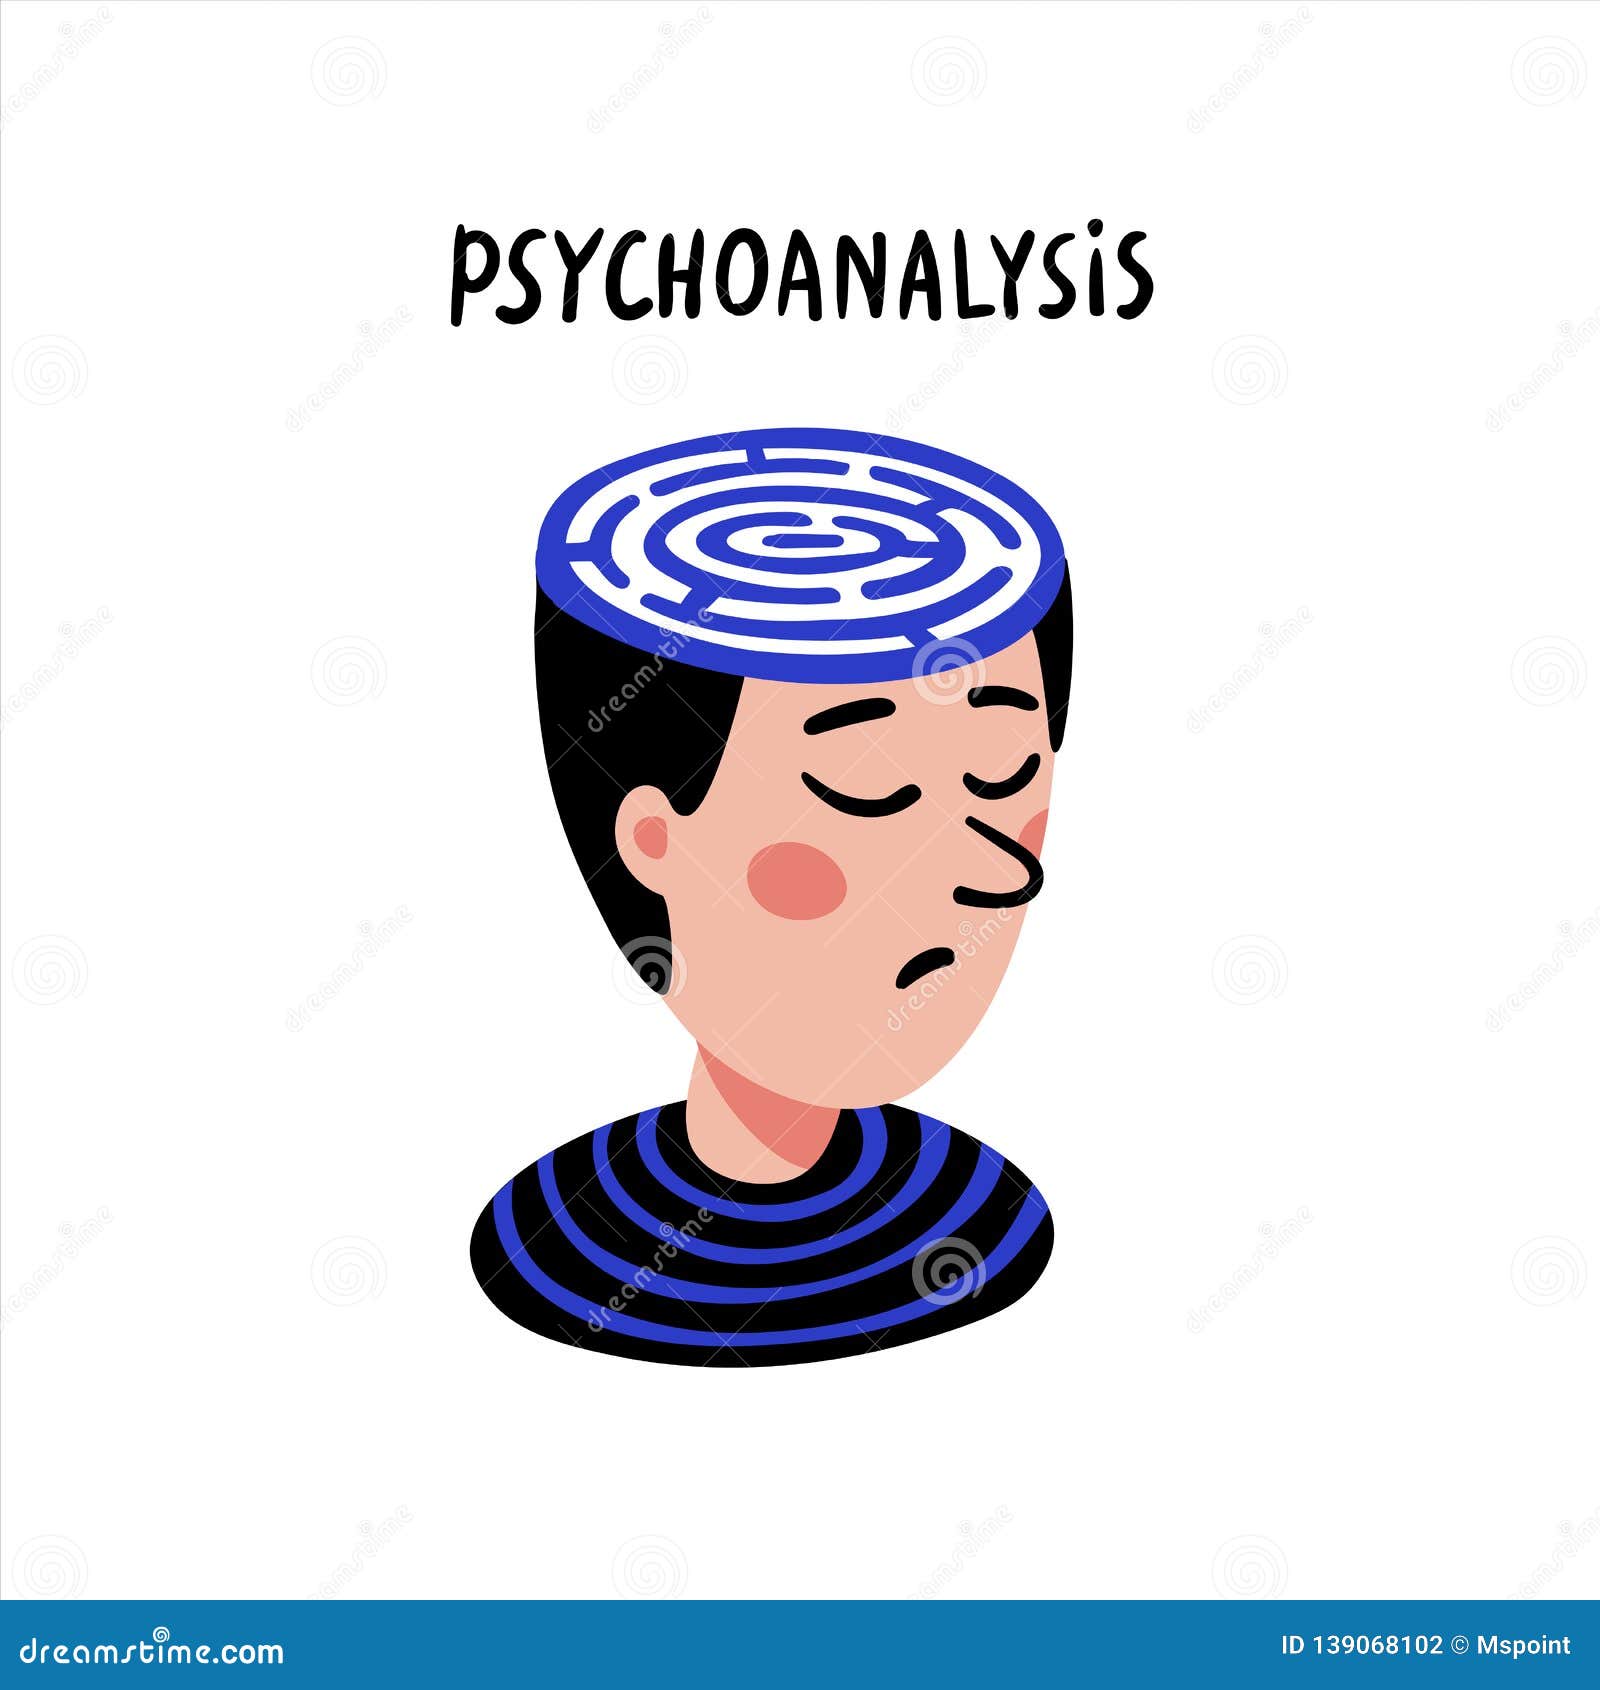 What is a psychoanalyst therapist